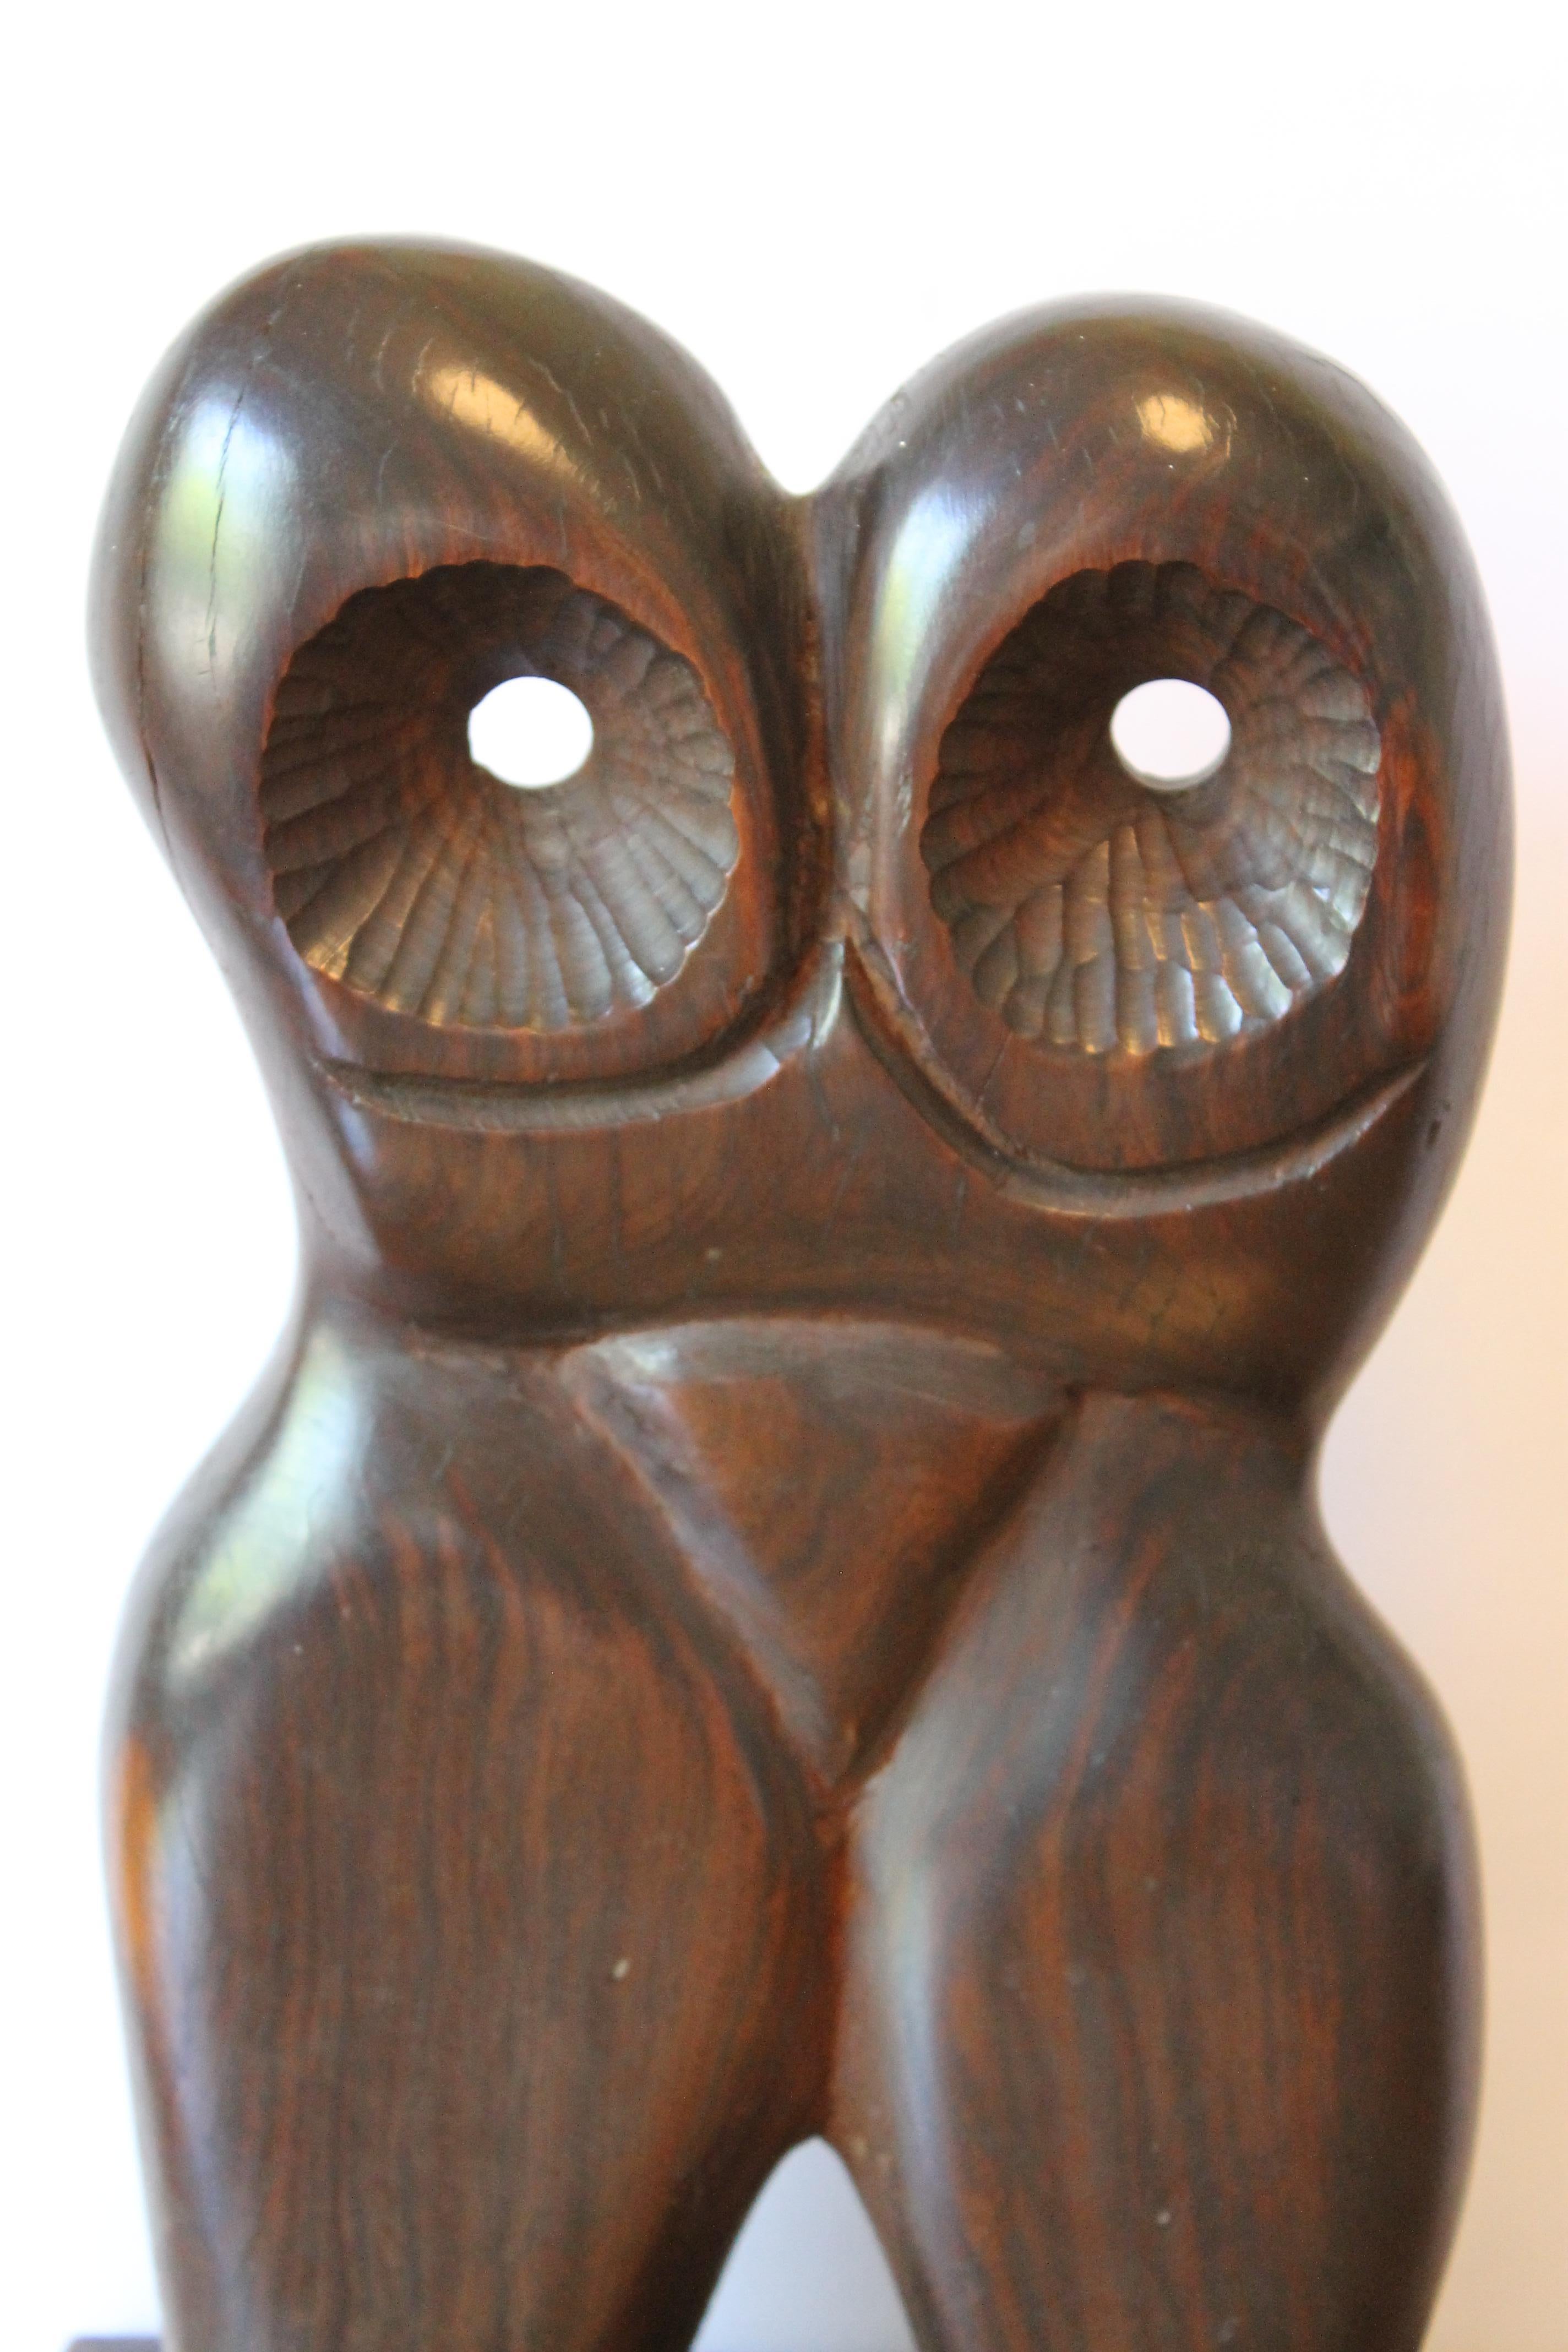 Abstract wood sculpture.  We believe the wood to be Ironwood.  Sculpture on base measures 13.25